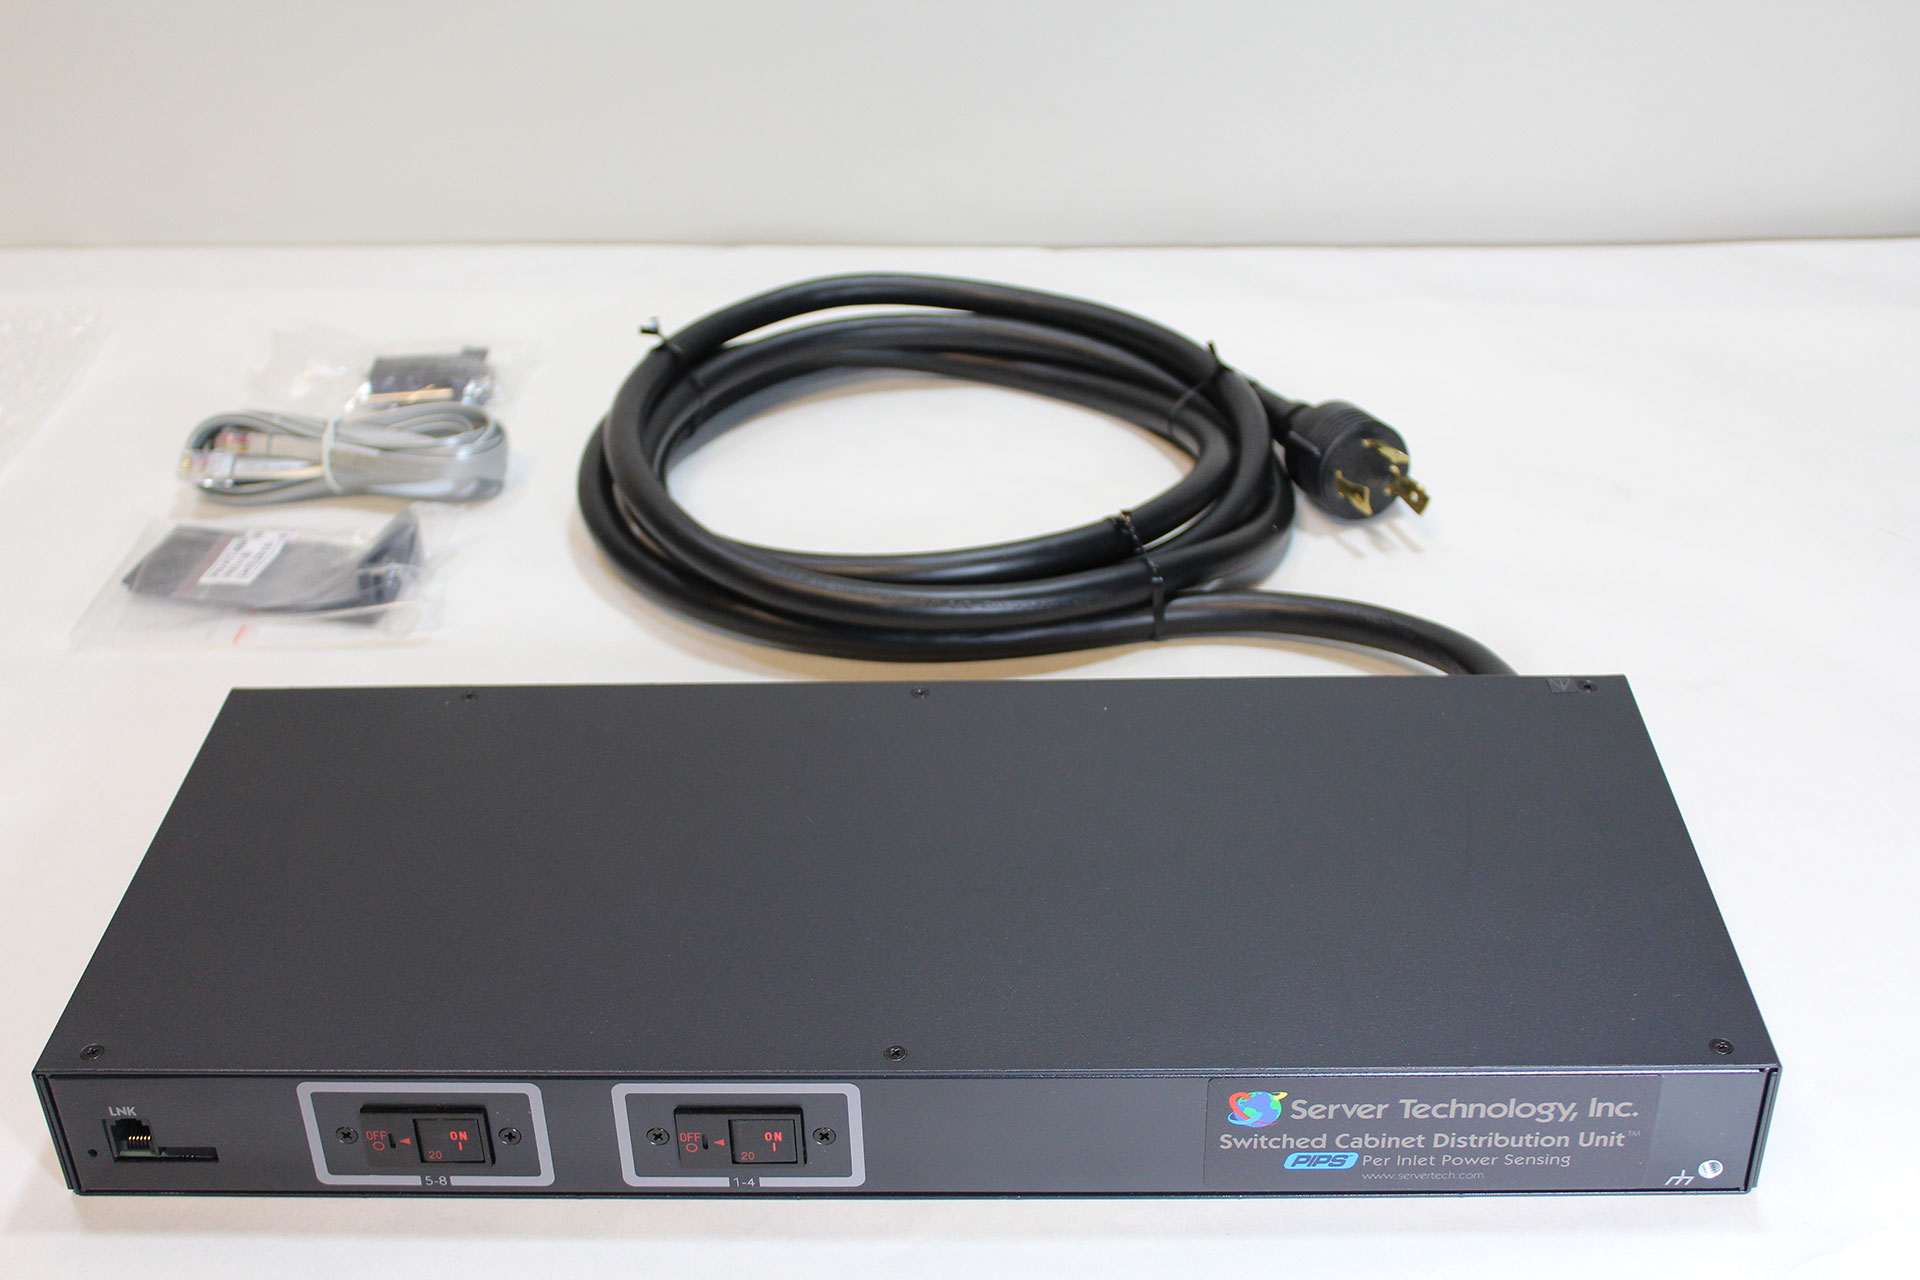 SERVER TECHNOLOGY Switched PDU CW-8H1B413 1.9kW-2.8kW (8) 5-20R